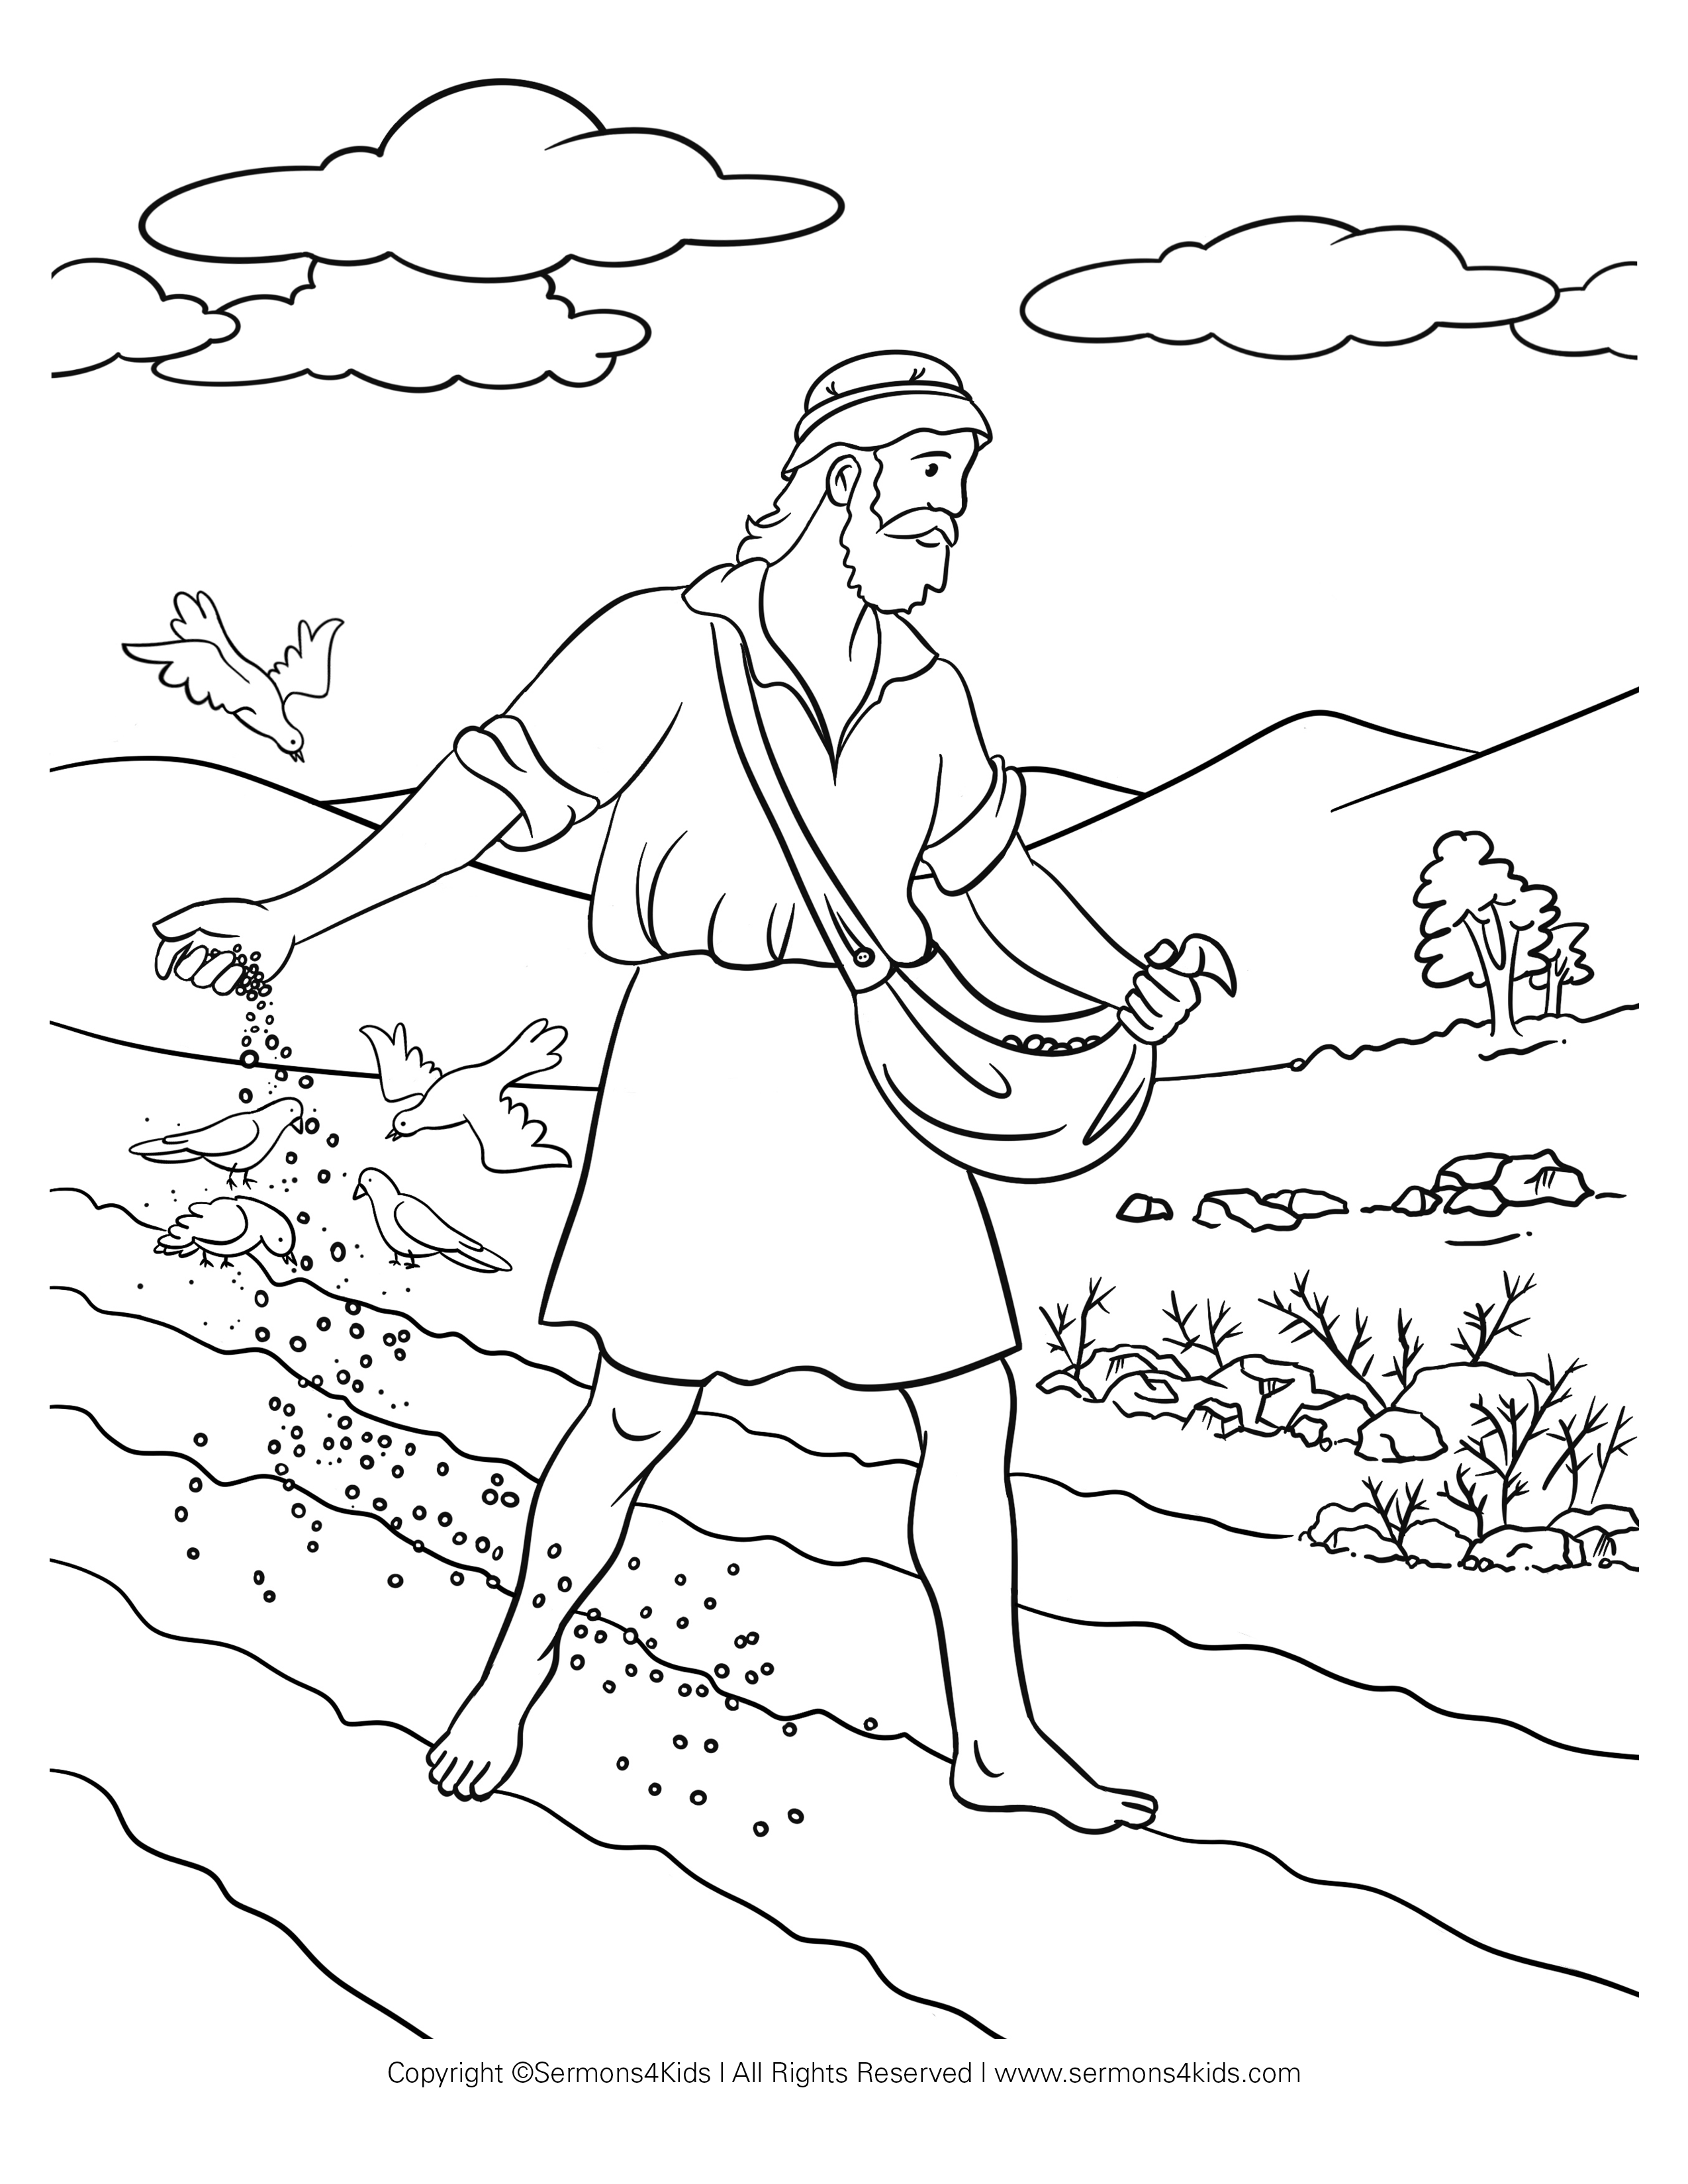 Printable Parable Of The Sower Activity Sheets